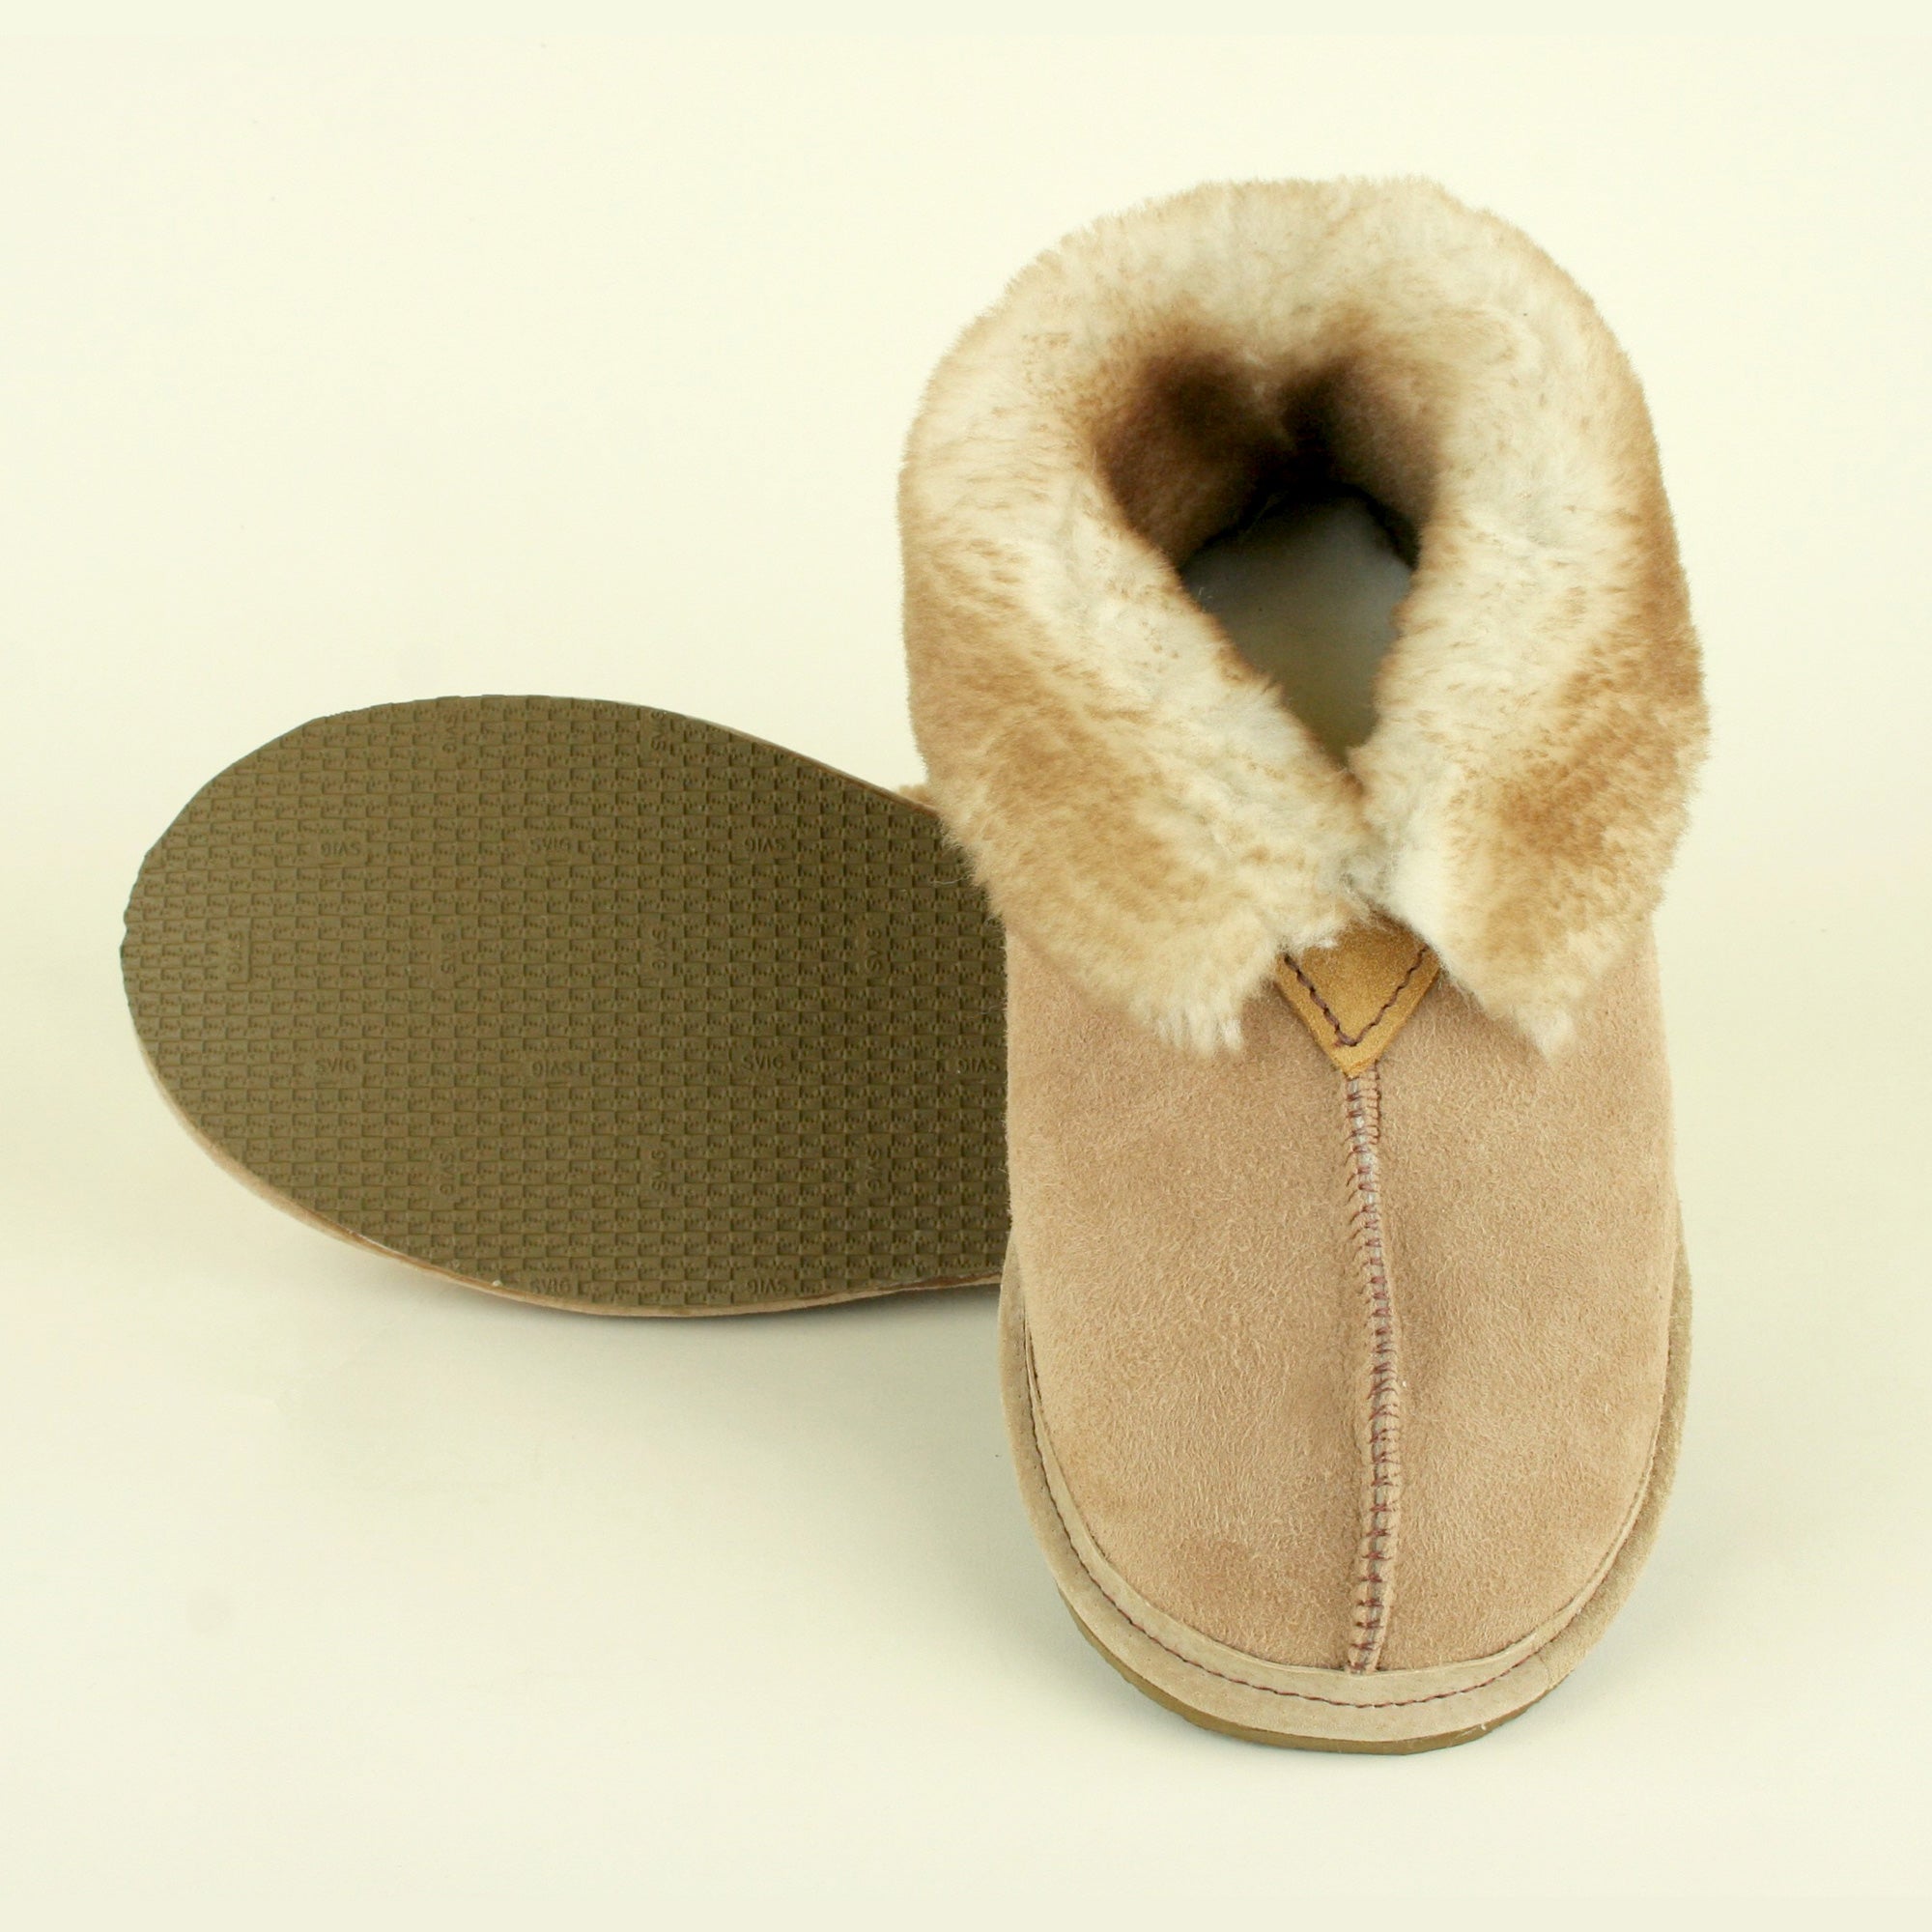 Product | All American Alpine Slipper, Men's | The Leather Works